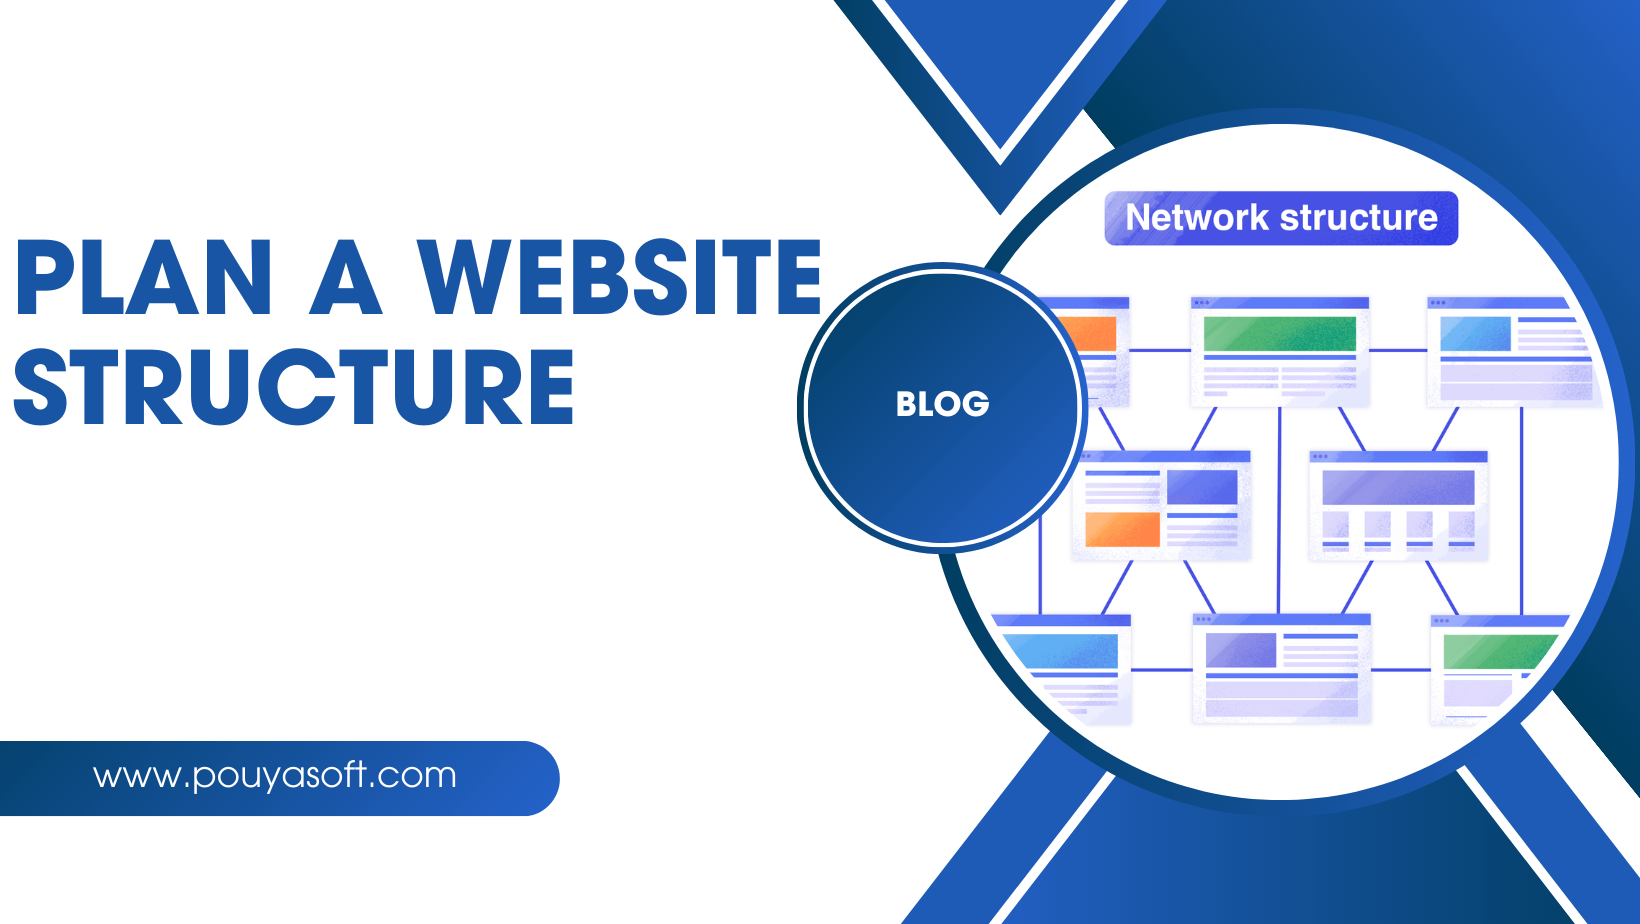 How to plan a website structure 🌐